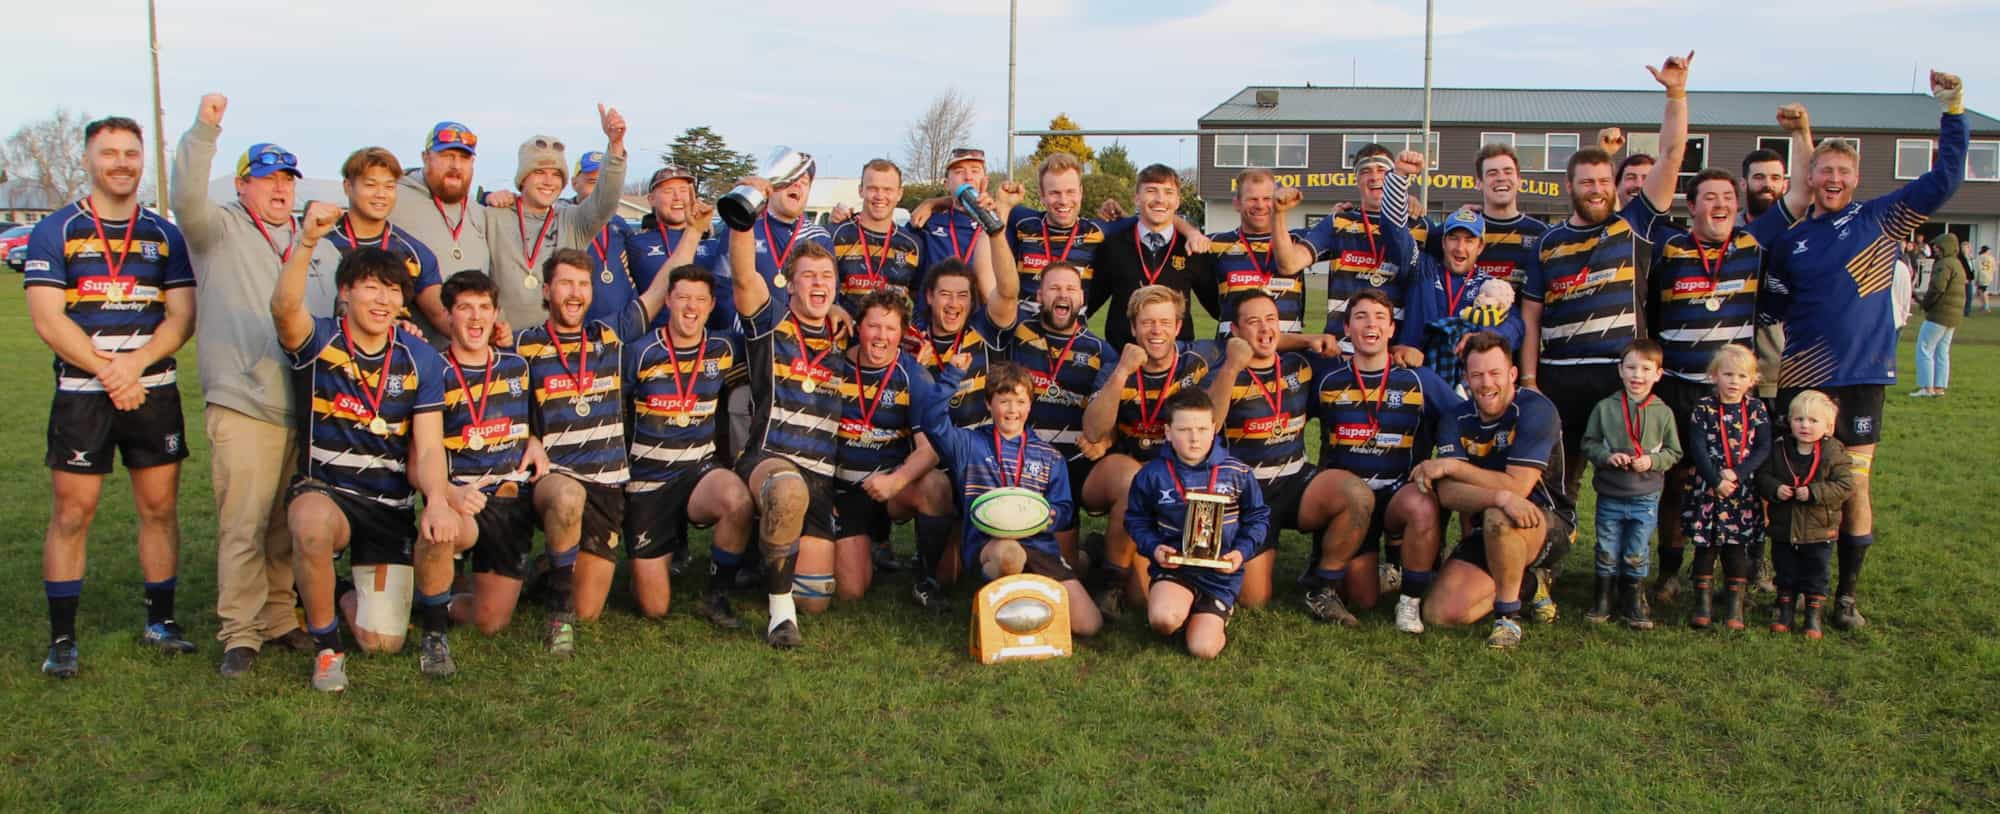 Warriors Youth & Rookie Rugby Club Canterbury Team Black Rugby